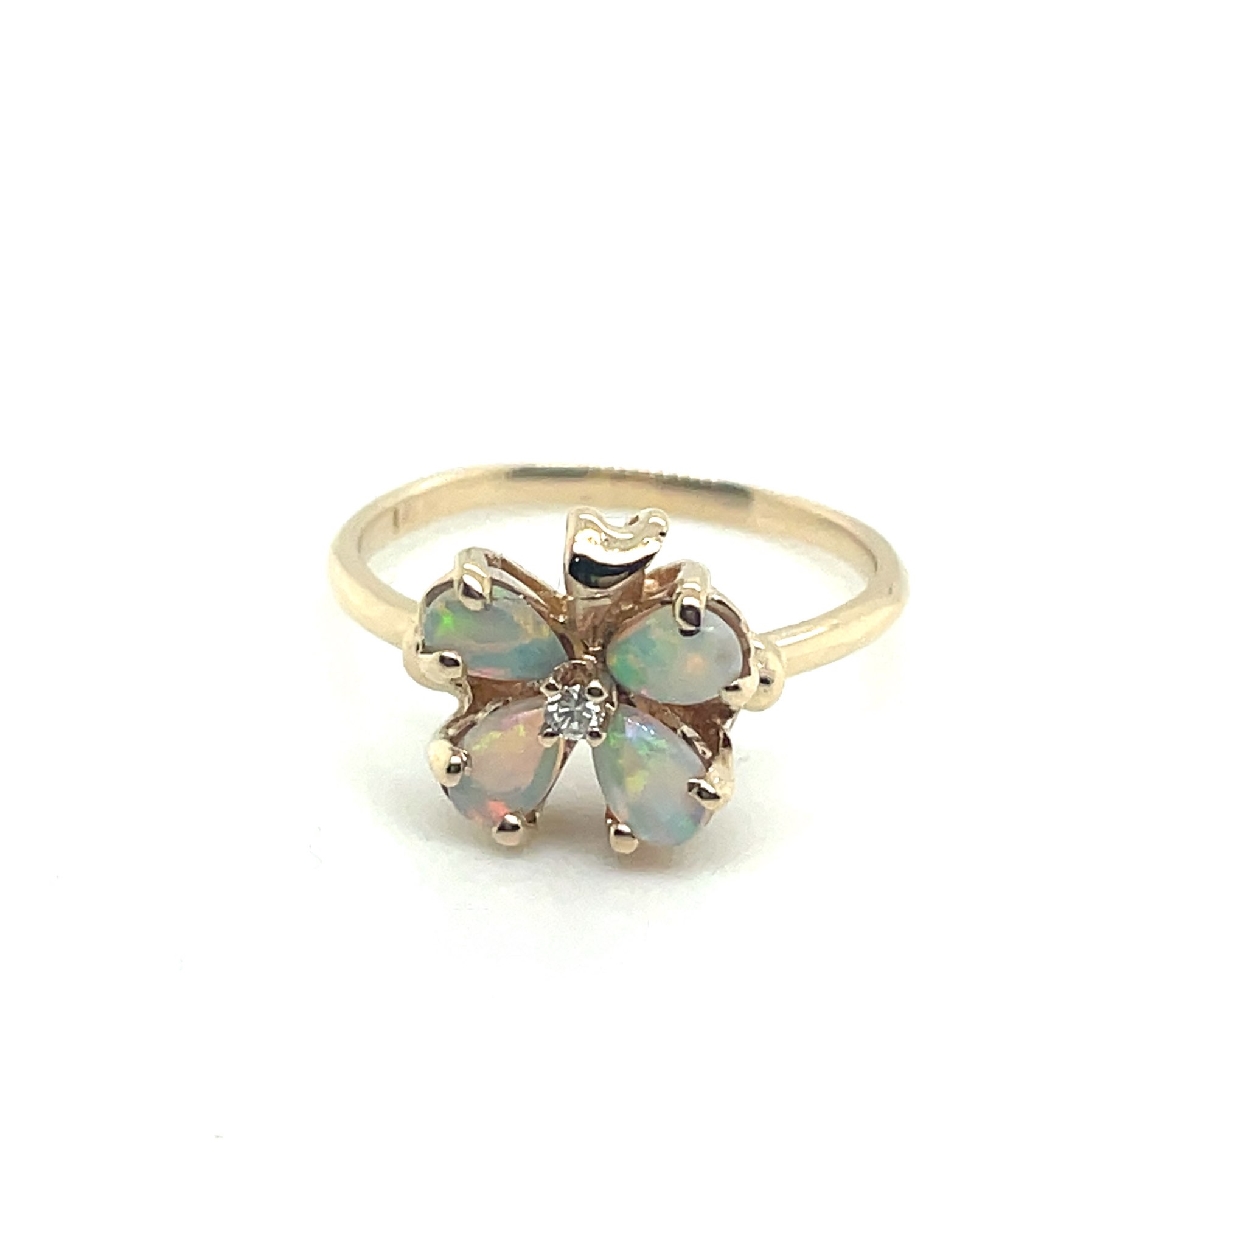 14K Yellow Gold Clover Shaped Opal Ring with Small Center Diamond Size 6.75